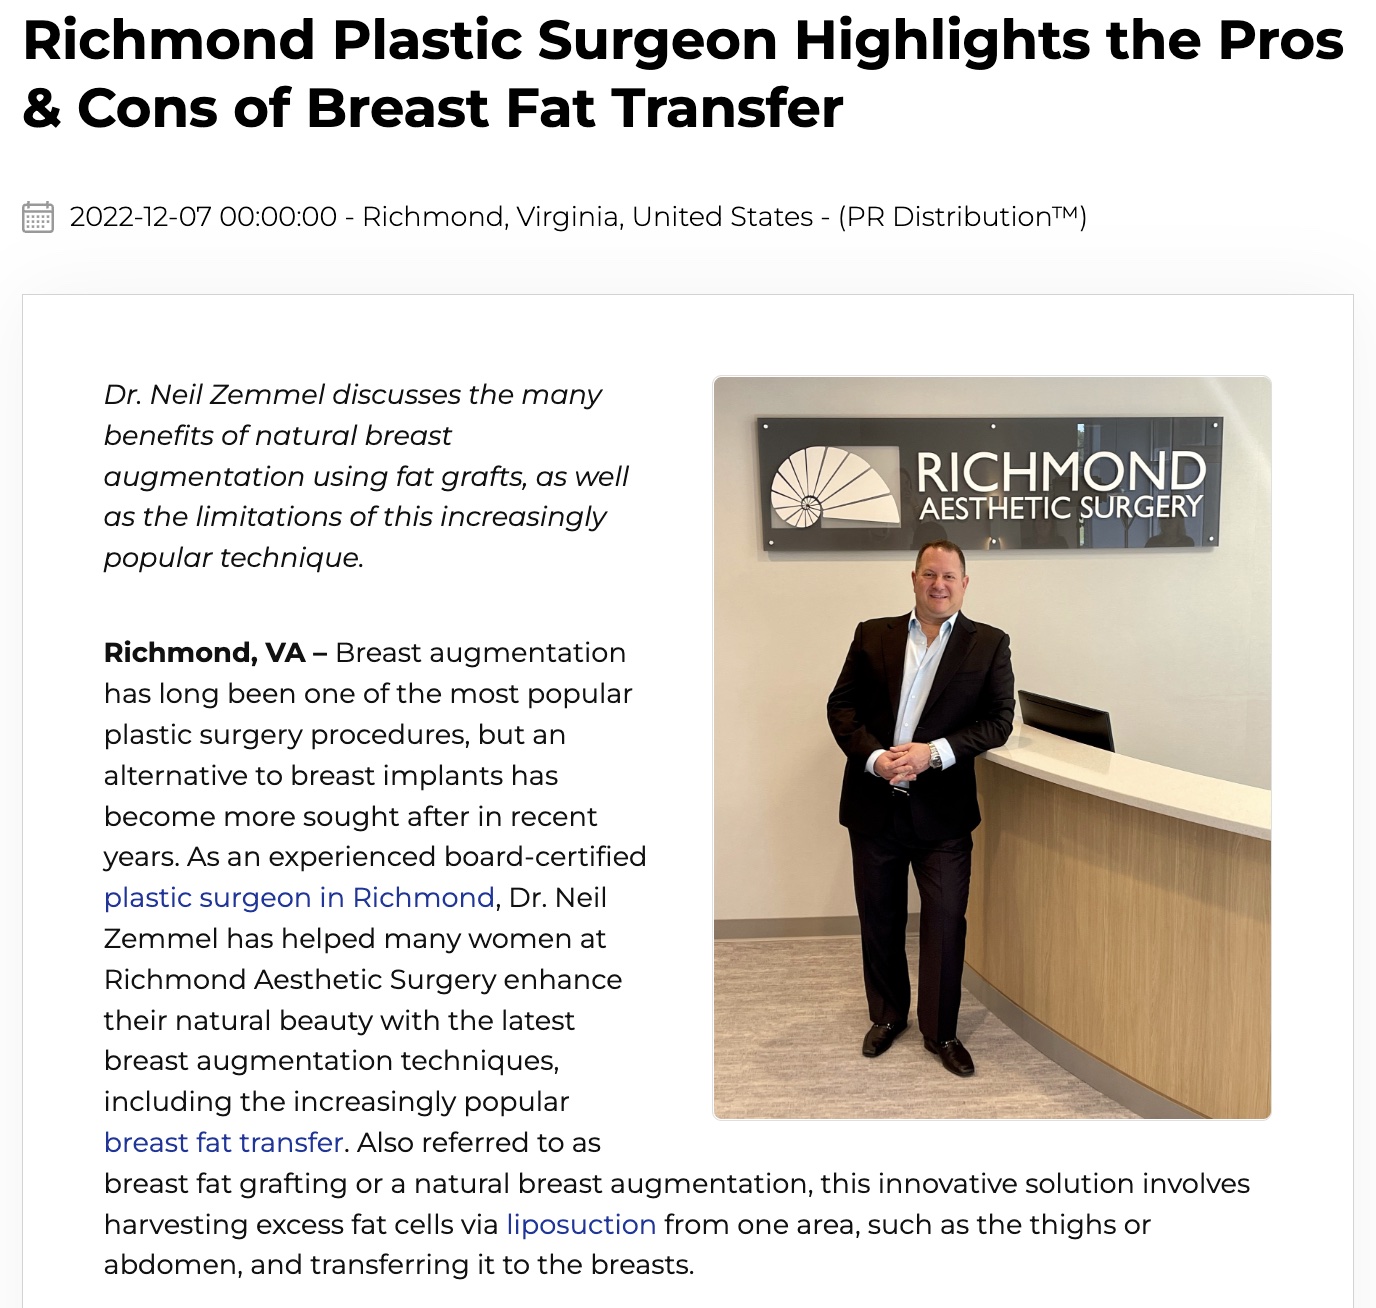 Richmond Plastic Surgeon Highlights the Pros & Cons of Breast Fat Transfer